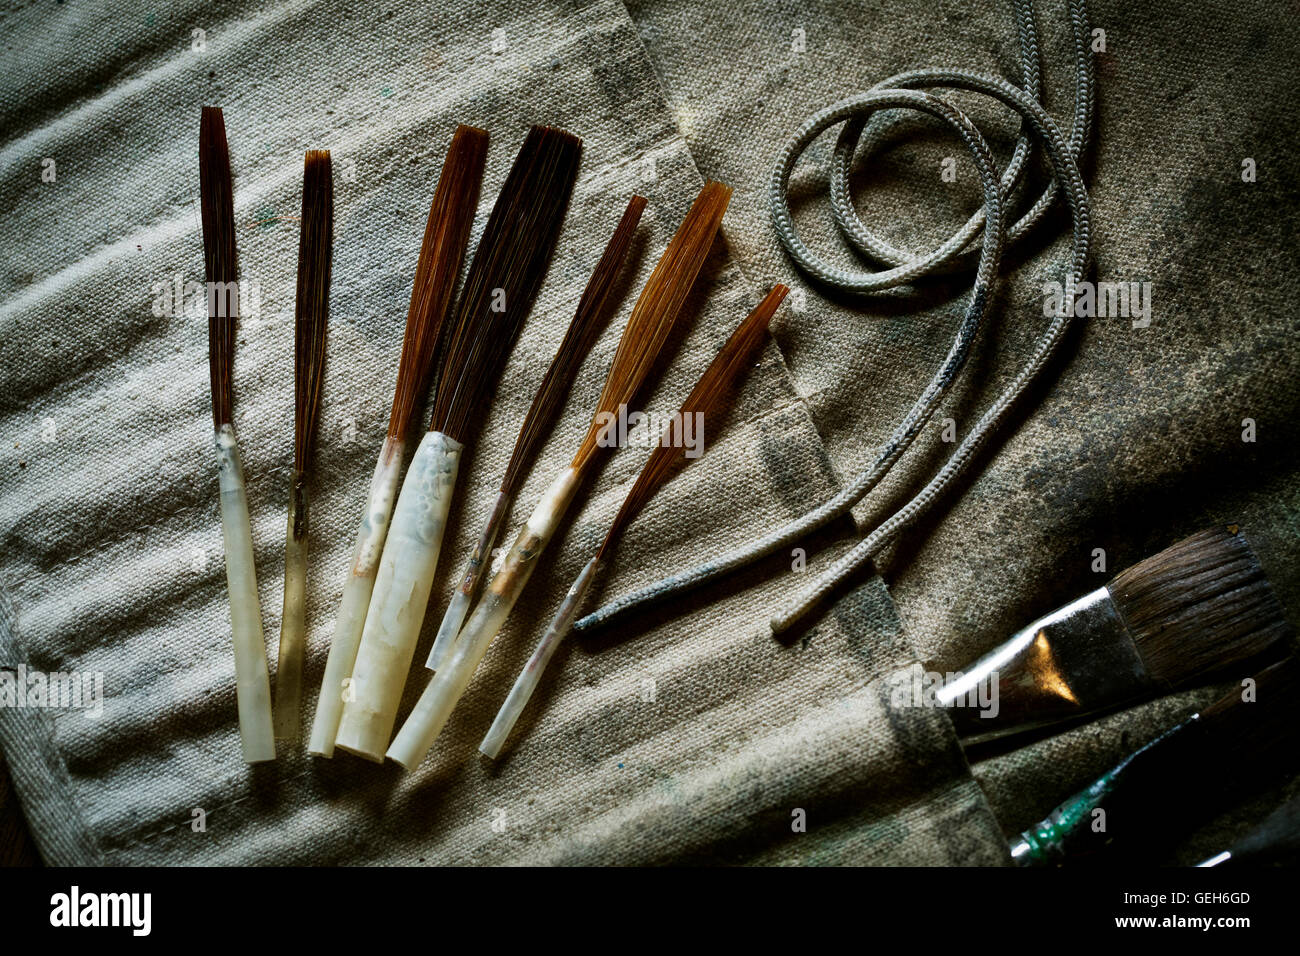 A collection of brushes and hand tools. Stock Photo